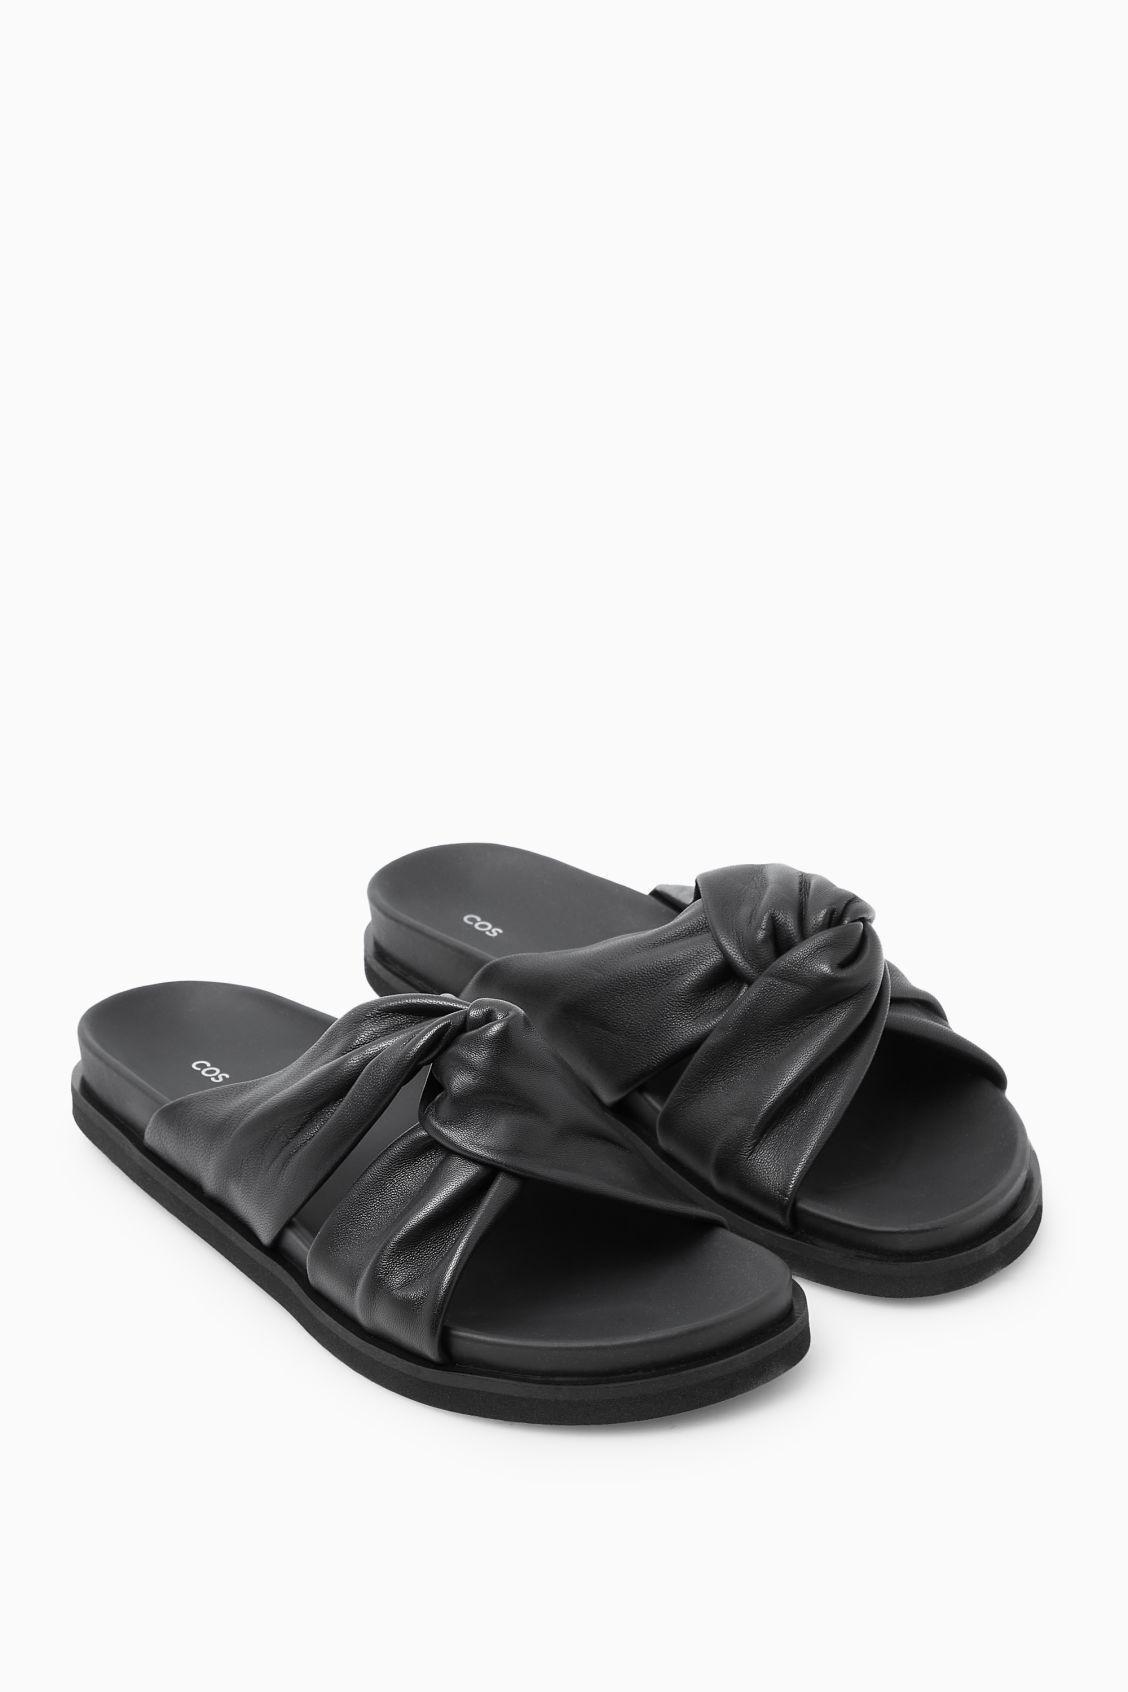 CROSSOVER LEATHER SLIDES Product Image